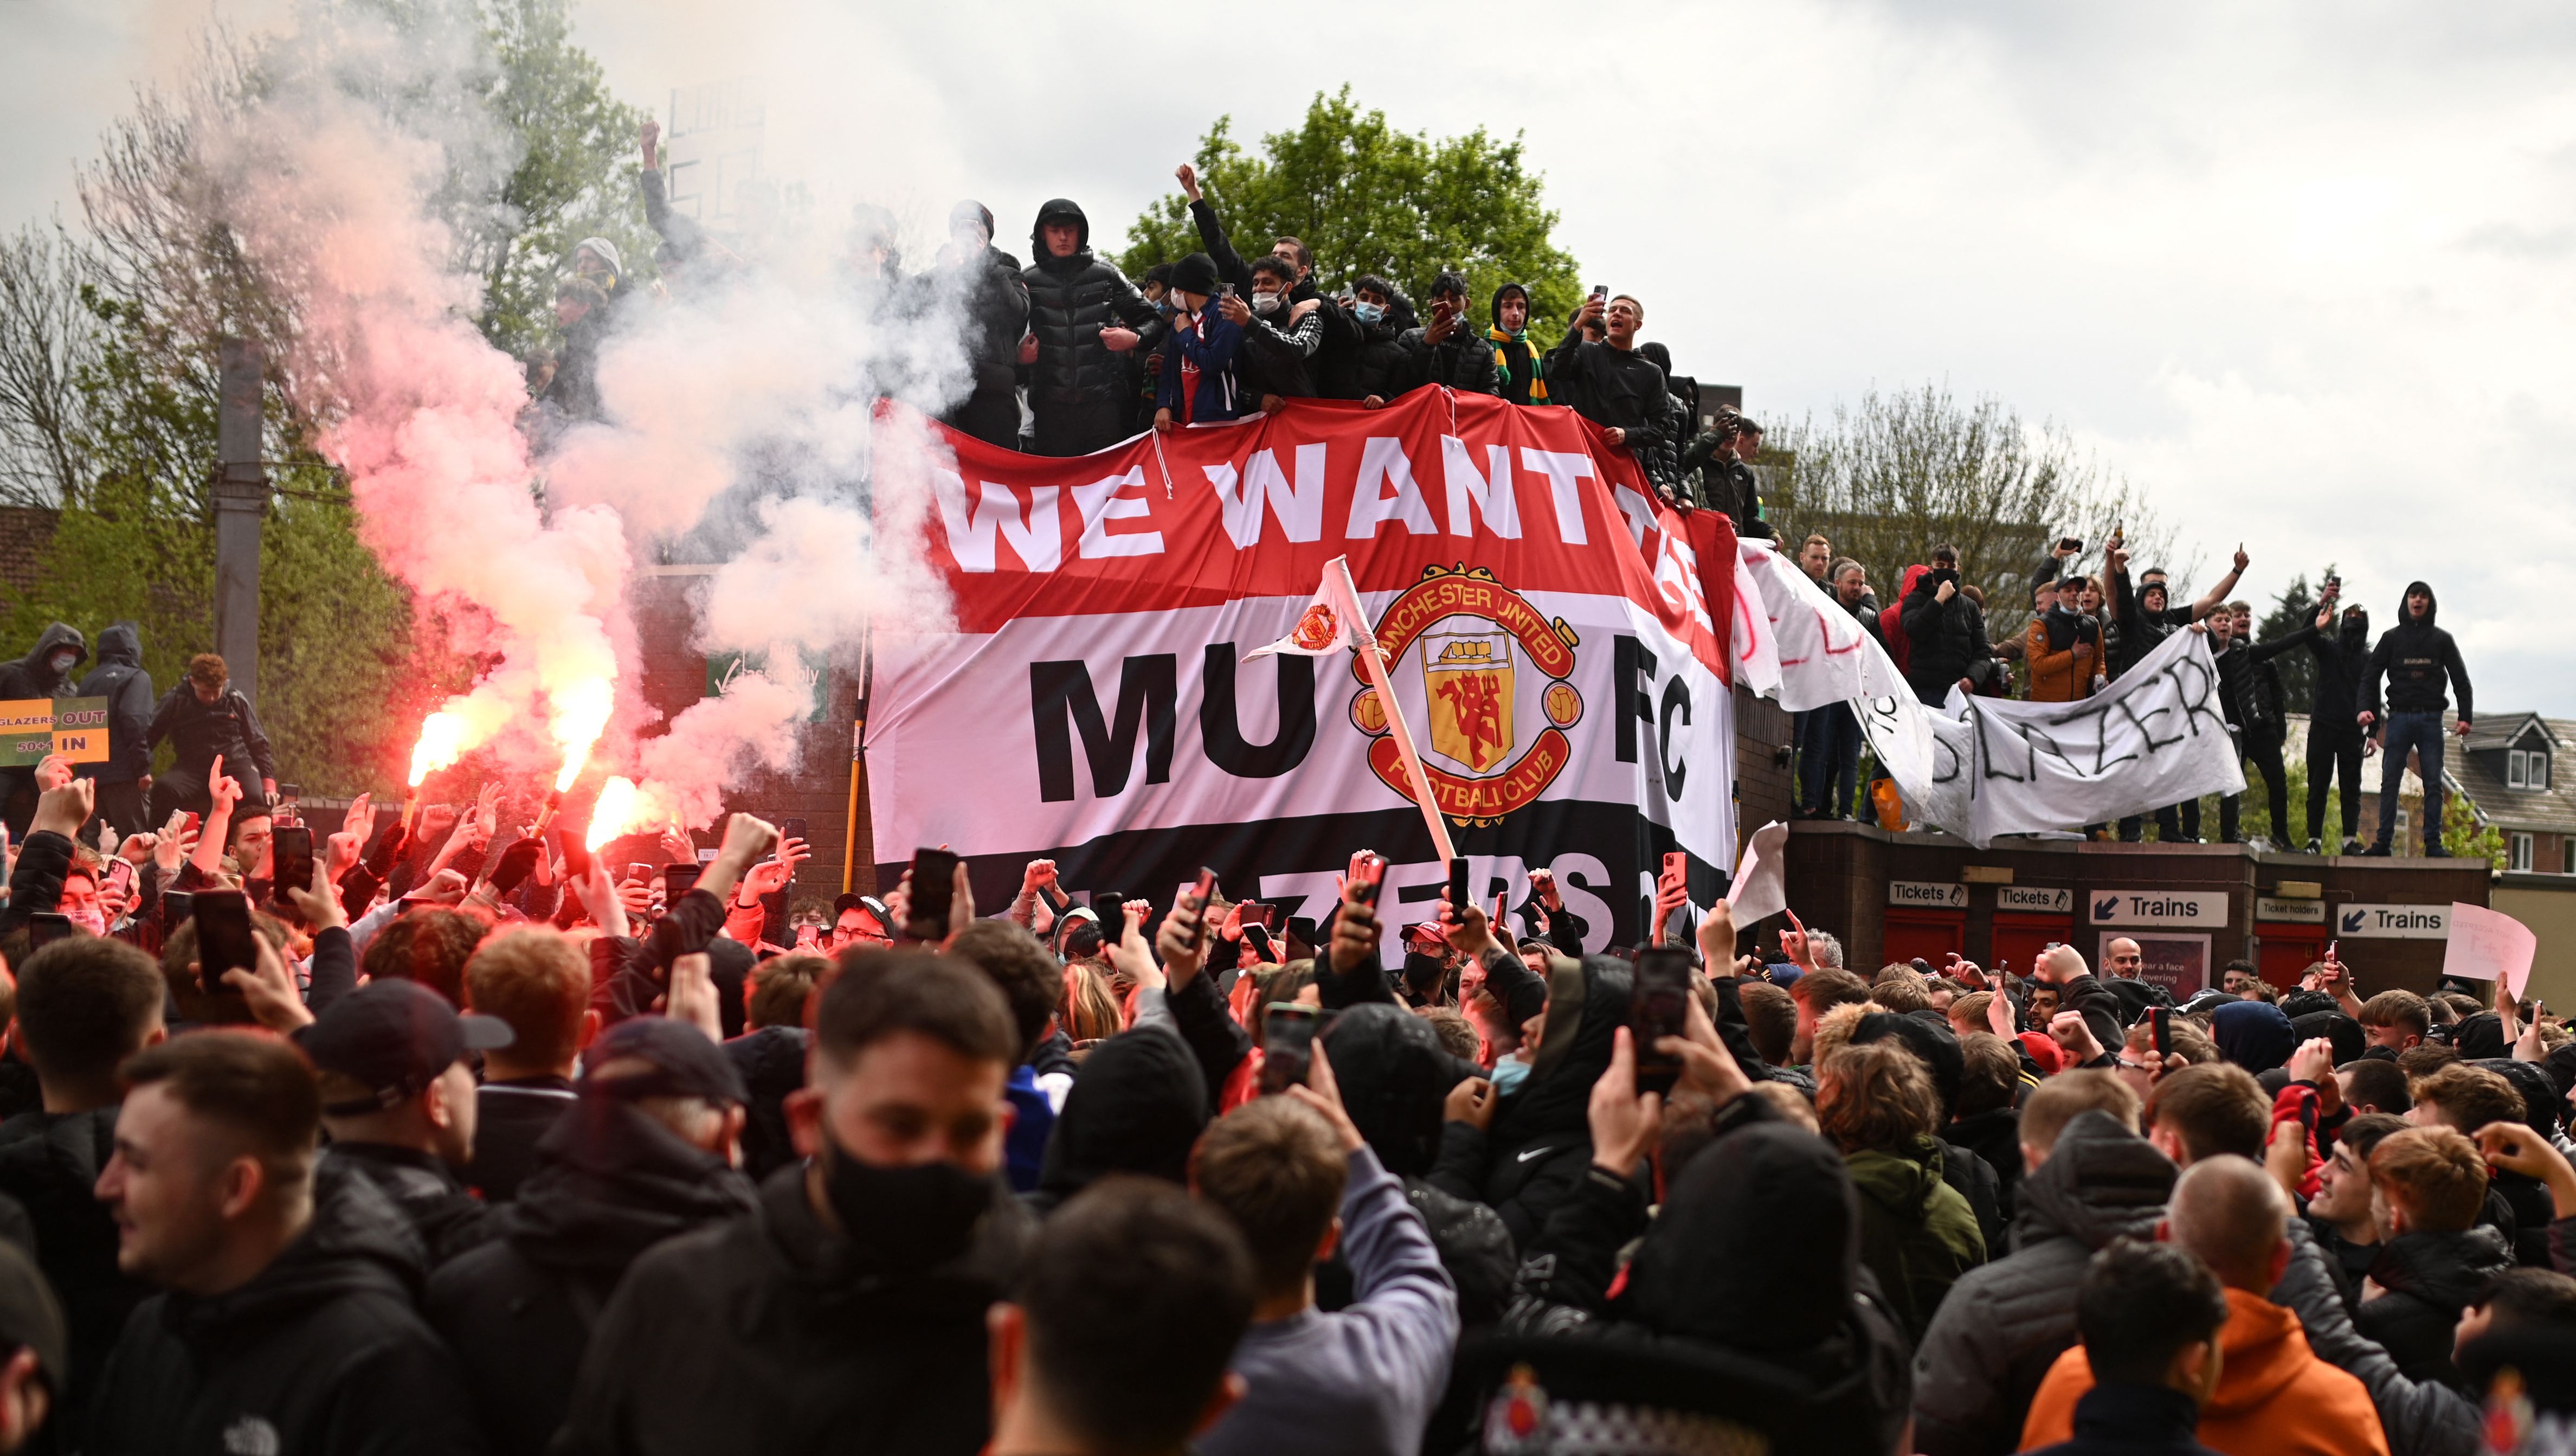 Over 1,000 Manchester United supporters protested outside Old Trafford on Sunday